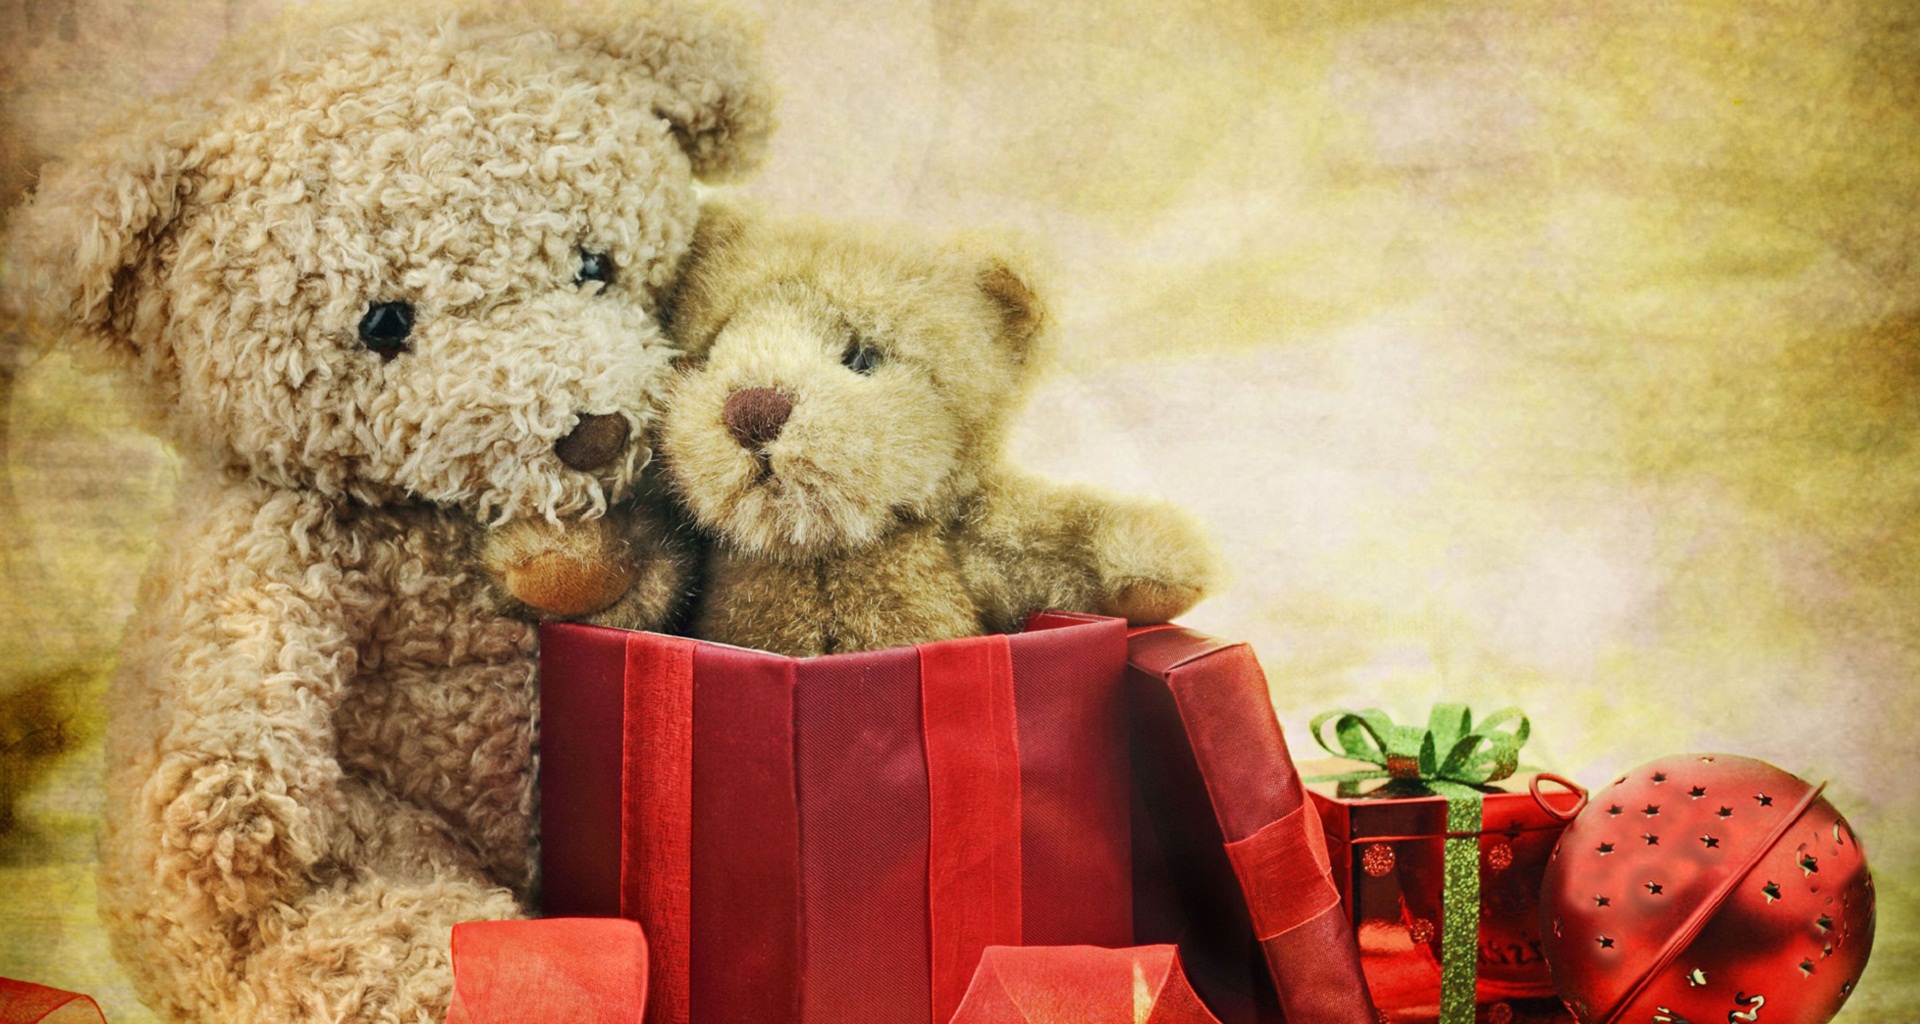 Teddy Day Images Free